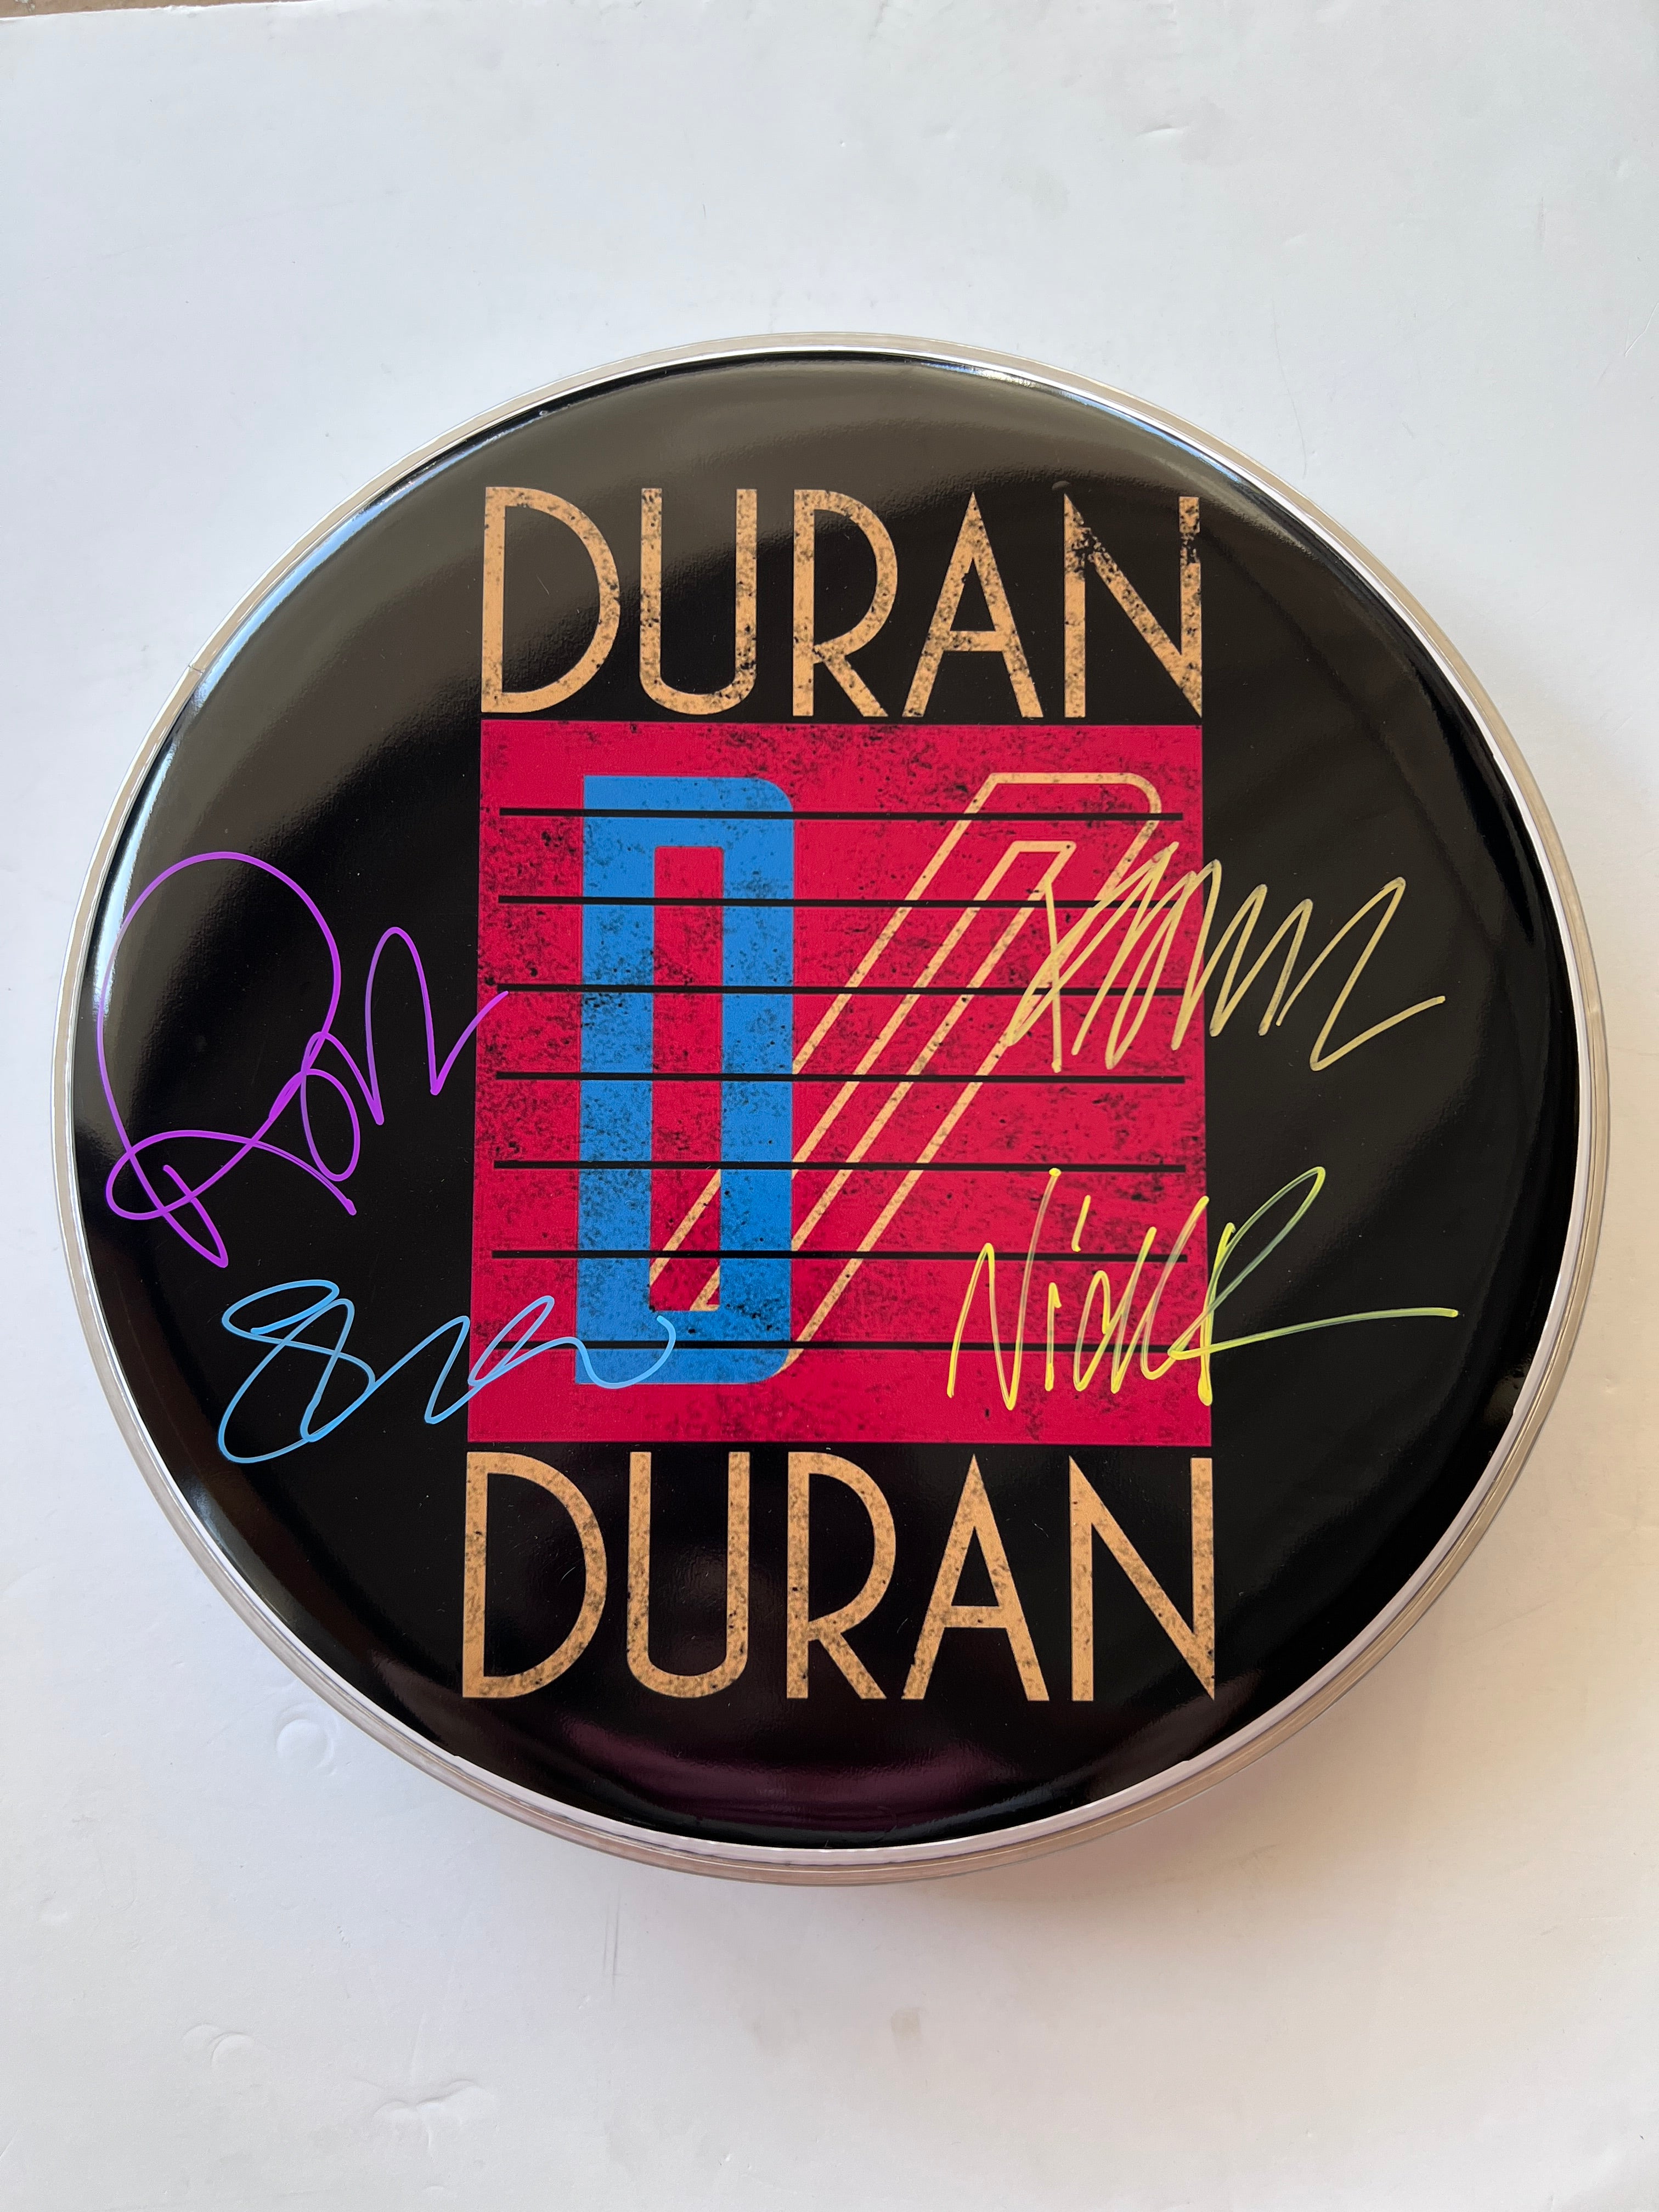 Duran Duran drumhead one-of-a-kind drumhead signed with proof